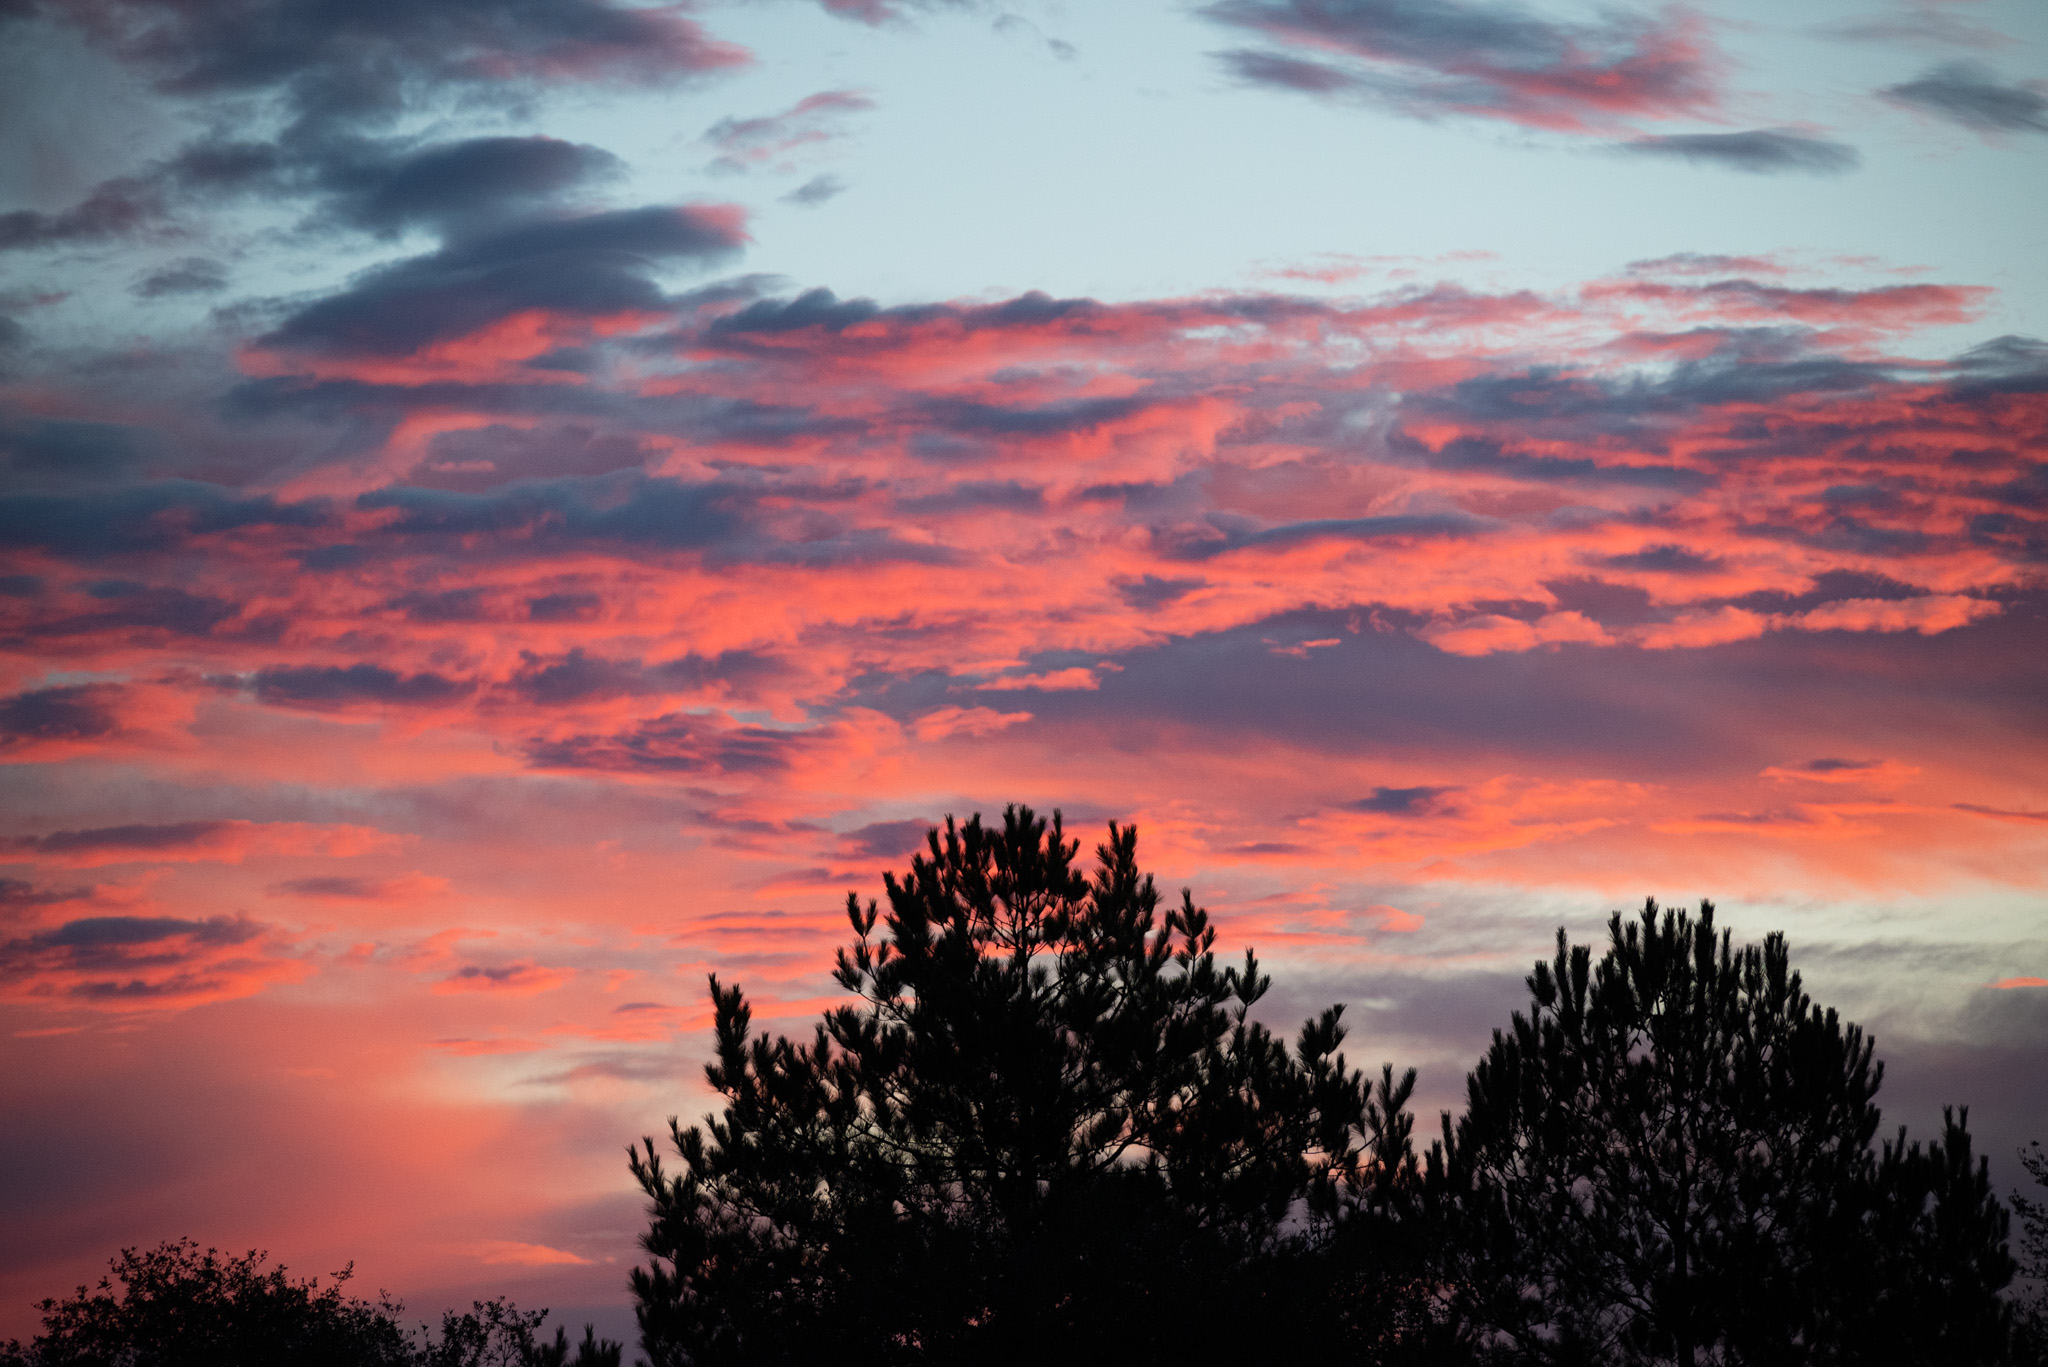 A sunset sky with varying shades of pink, peach, orange, blue, and grey with blue sky in between; in the foreground are the tops of pine trees